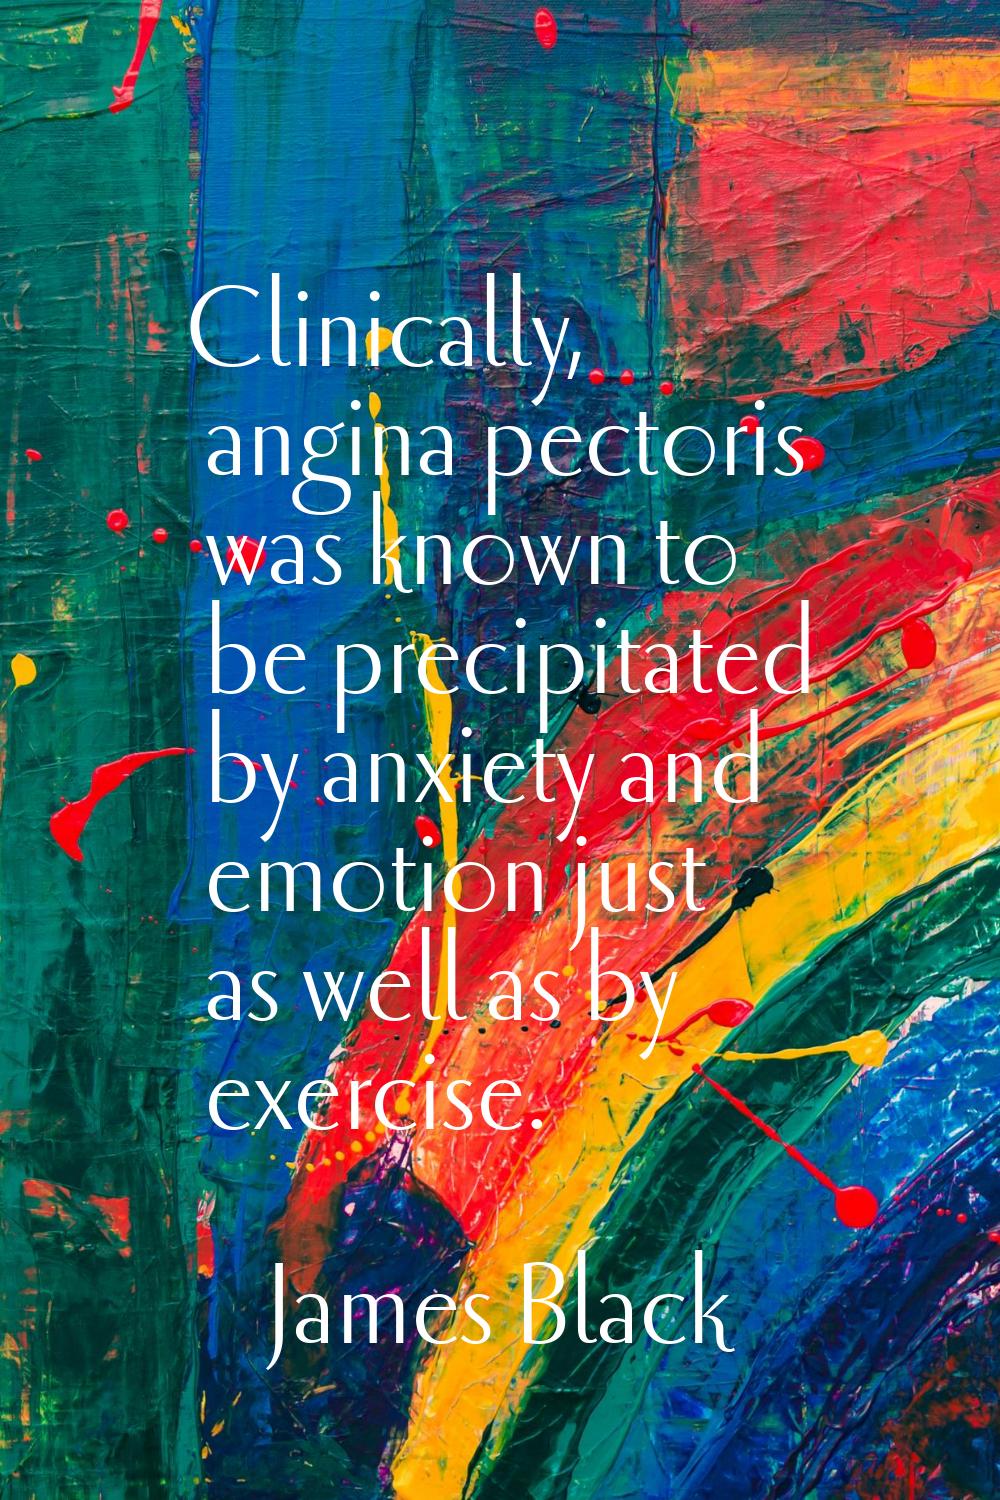 Clinically, angina pectoris was known to be precipitated by anxiety and emotion just as well as by 